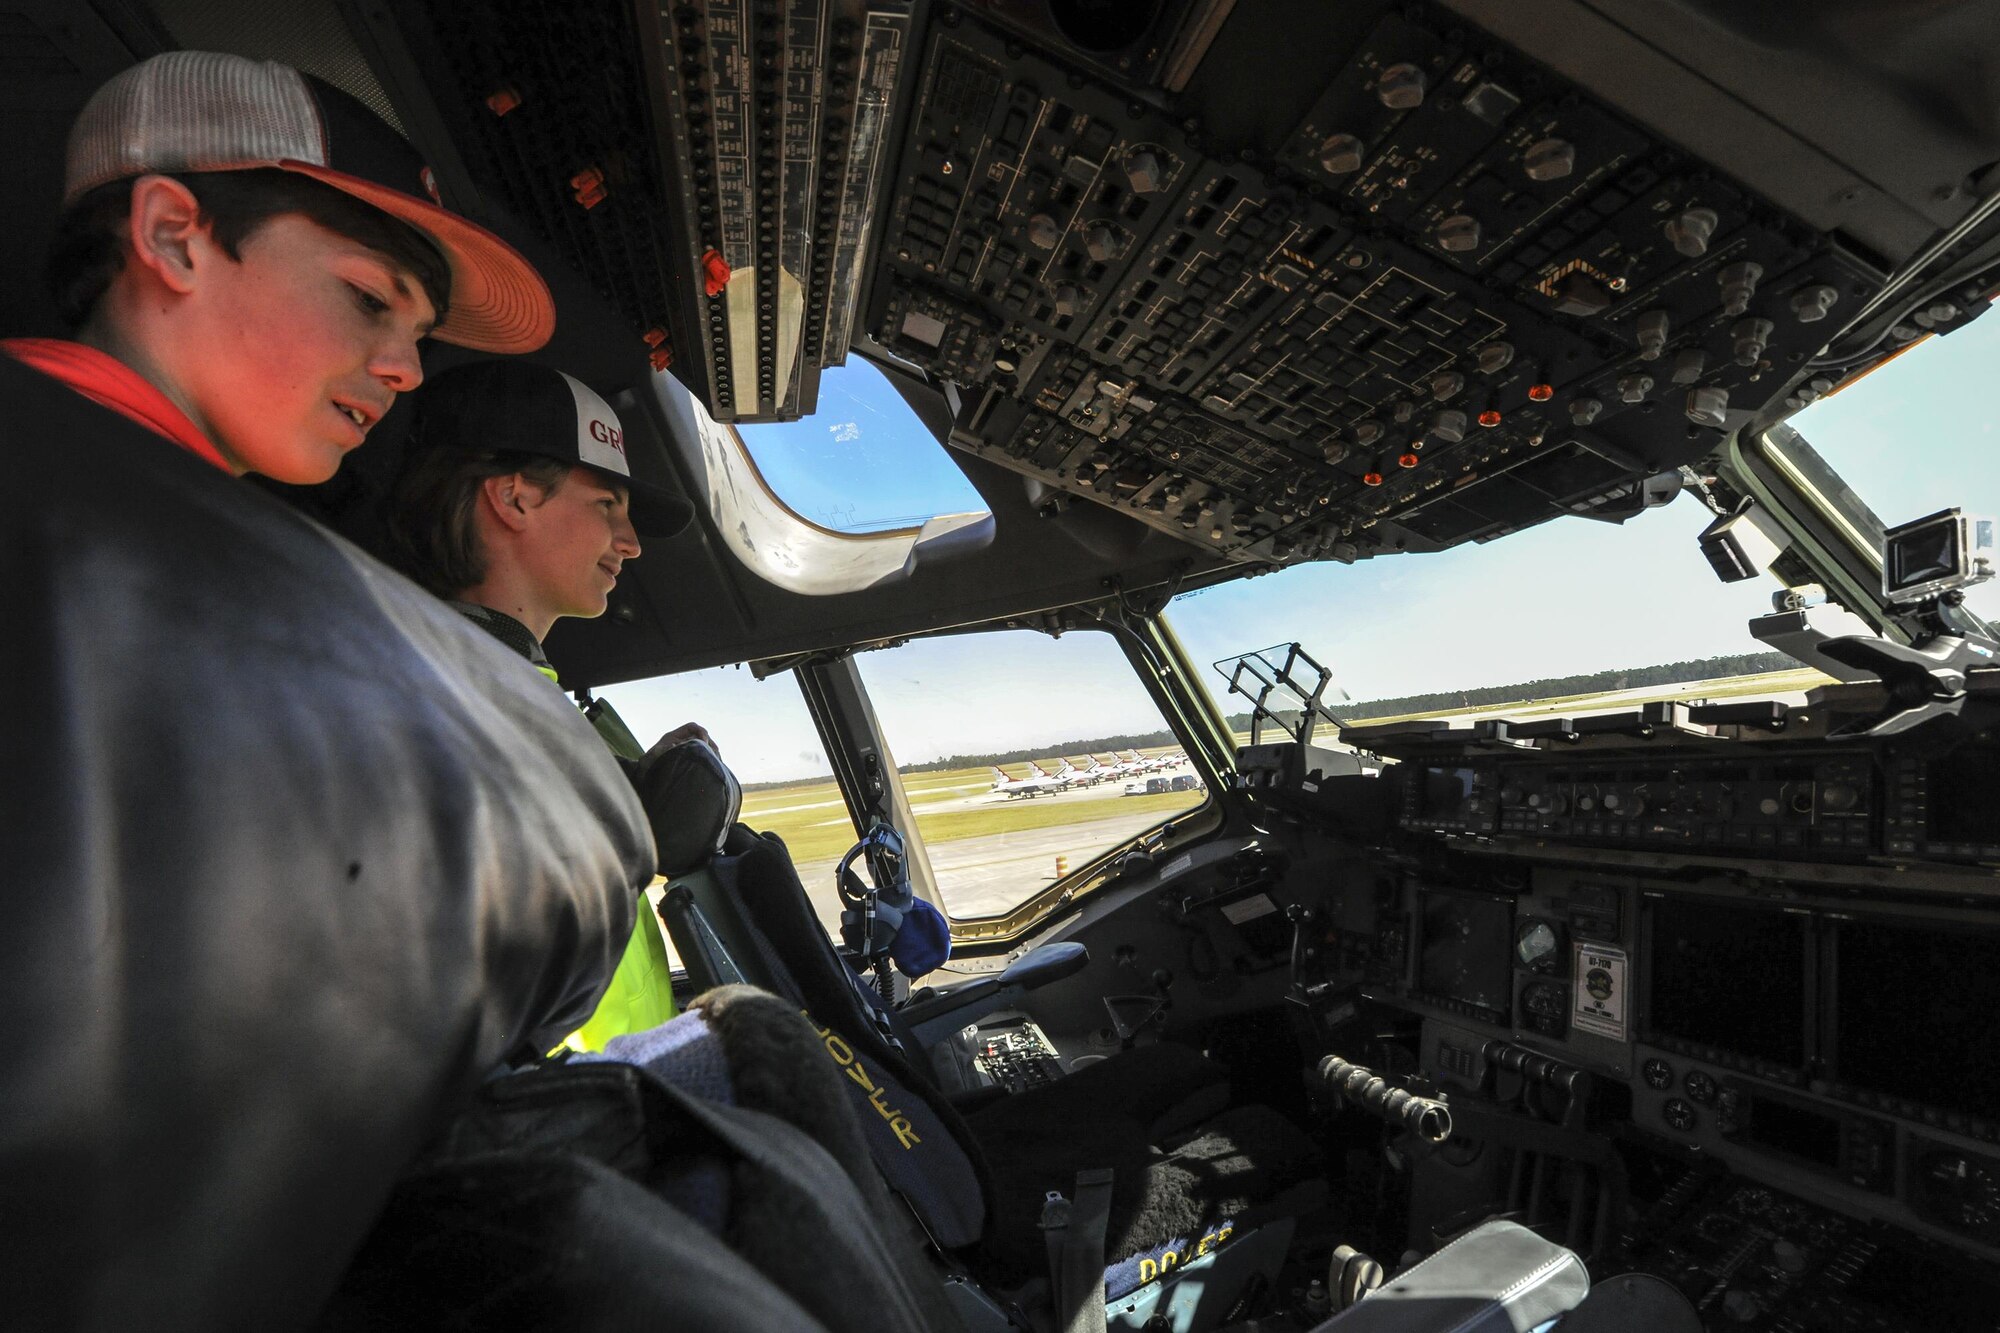 Community members observe the cockpit of a HC-130J Combat King during the Thunder Over South Georgia Air Show, Oct. 29,2017 at Moody Air Force Base, Ga. Moody opened its gates to the public for a free, two-day event as a way to thank the local community for their ongoing support of the base’s mission (U.S. Air Force photo by Airman Eugene Oliver)